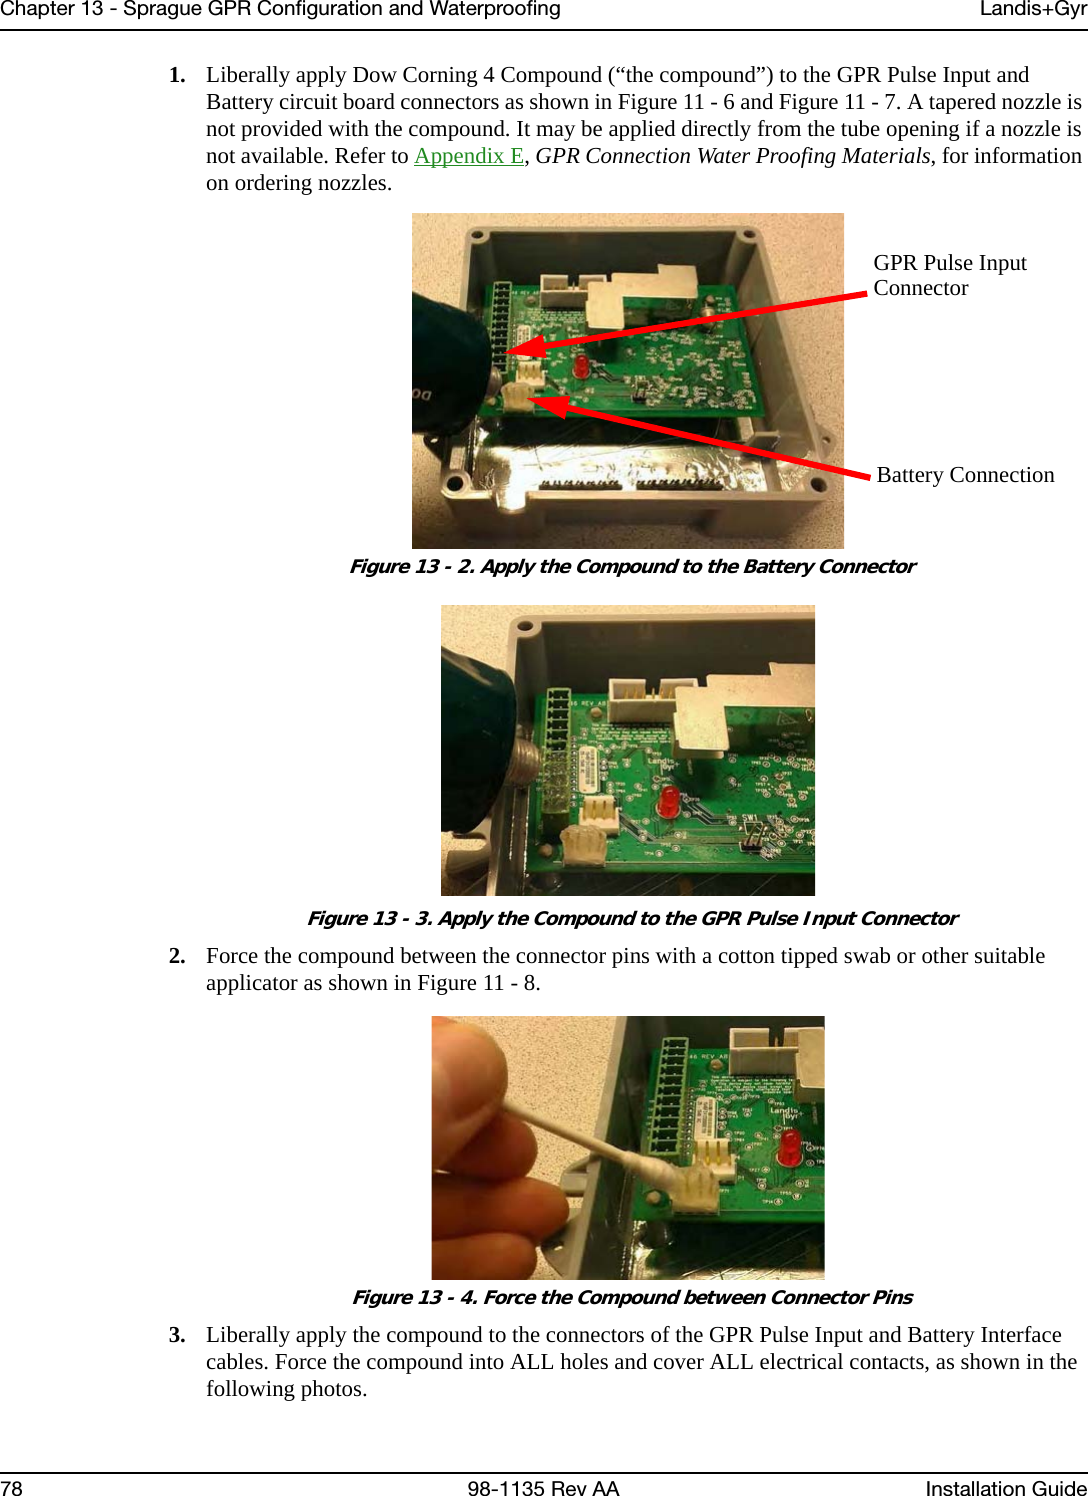 Chapter 13 - Sprague GPR Configuration and Waterproofing Landis+Gyr78 98-1135 Rev AA Installation Guide1. Liberally apply Dow Corning 4 Compound (“the compound”) to the GPR Pulse Input and Battery circuit board connectors as shown in Figure 11 - 6 and Figure 11 - 7. A tapered nozzle is not provided with the compound. It may be applied directly from the tube opening if a nozzle is not available. Refer to Appendix E, GPR Connection Water Proofing Materials, for information on ordering nozzles. Figure 13 - 2. Apply the Compound to the Battery Connector Figure 13 - 3. Apply the Compound to the GPR Pulse Input Connector2. Force the compound between the connector pins with a cotton tipped swab or other suitable applicator as shown in Figure 11 - 8. Figure 13 - 4. Force the Compound between Connector Pins3. Liberally apply the compound to the connectors of the GPR Pulse Input and Battery Interface cables. Force the compound into ALL holes and cover ALL electrical contacts, as shown in the following photos.GPR Pulse InputConnectorBattery Connection